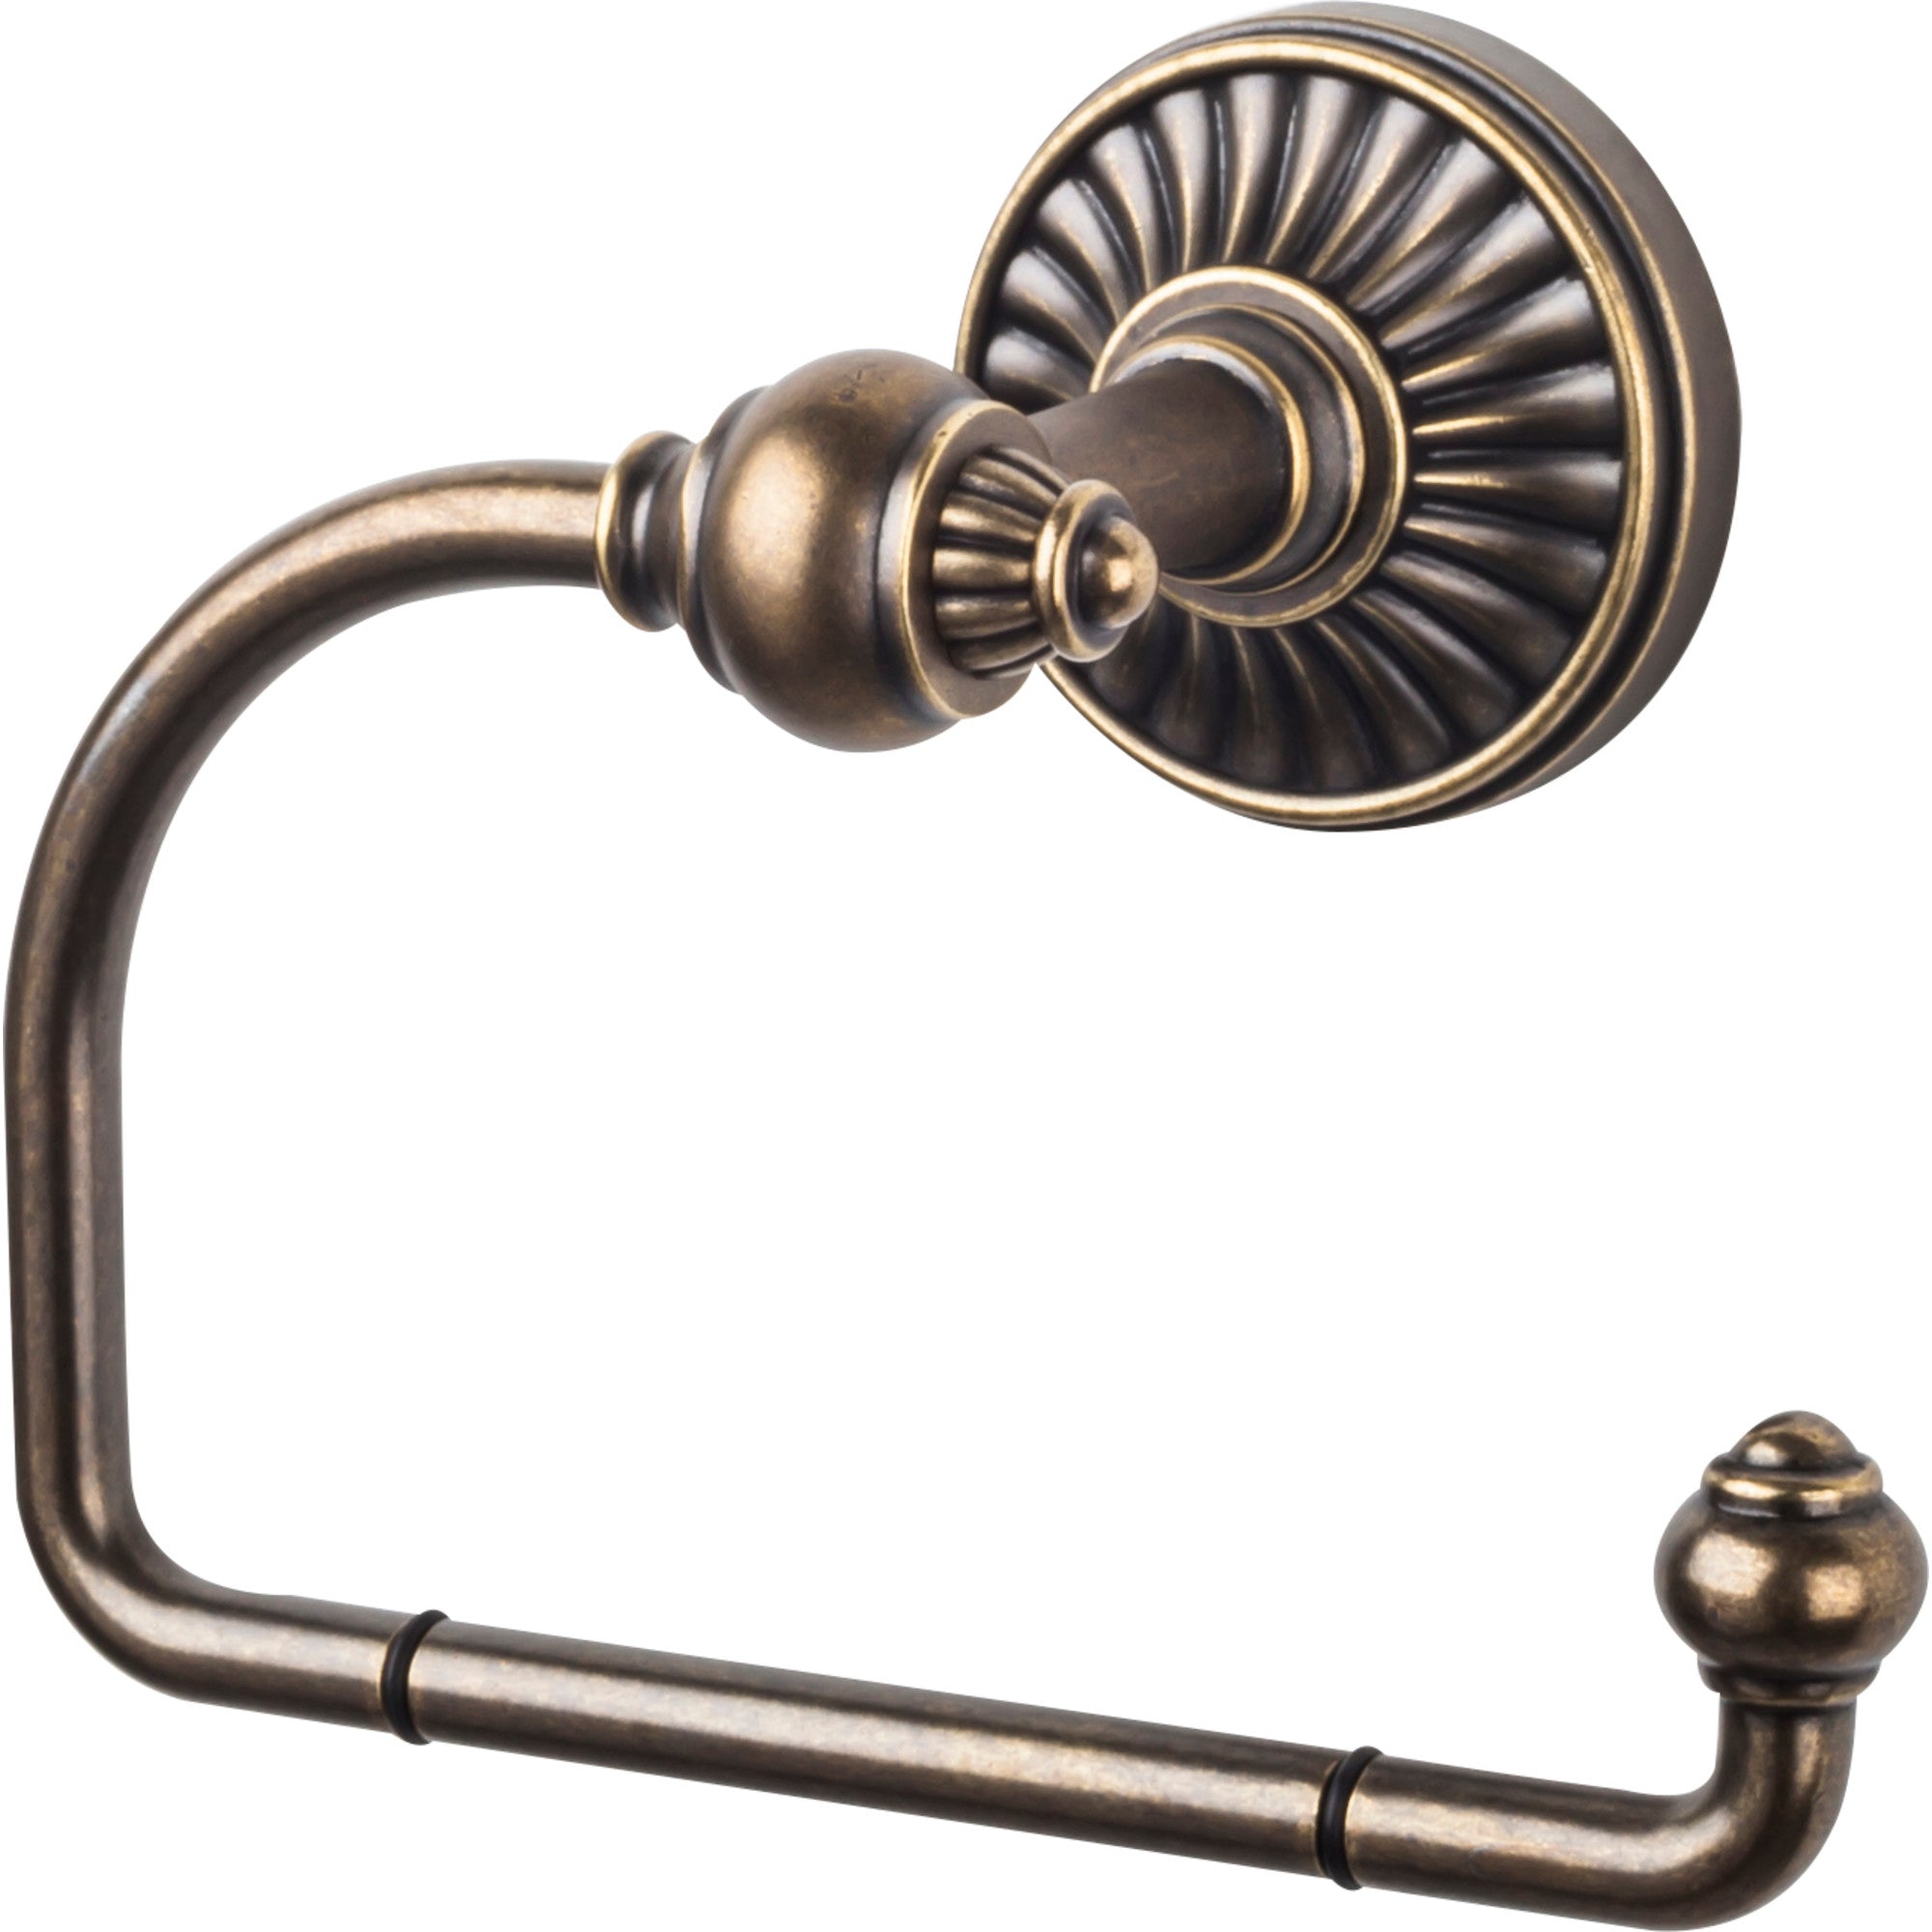 Top Knobs - Hardware - Tuscany Bath Tissue Hook - Pewter Antique - Union Lighting Luminaires Décor